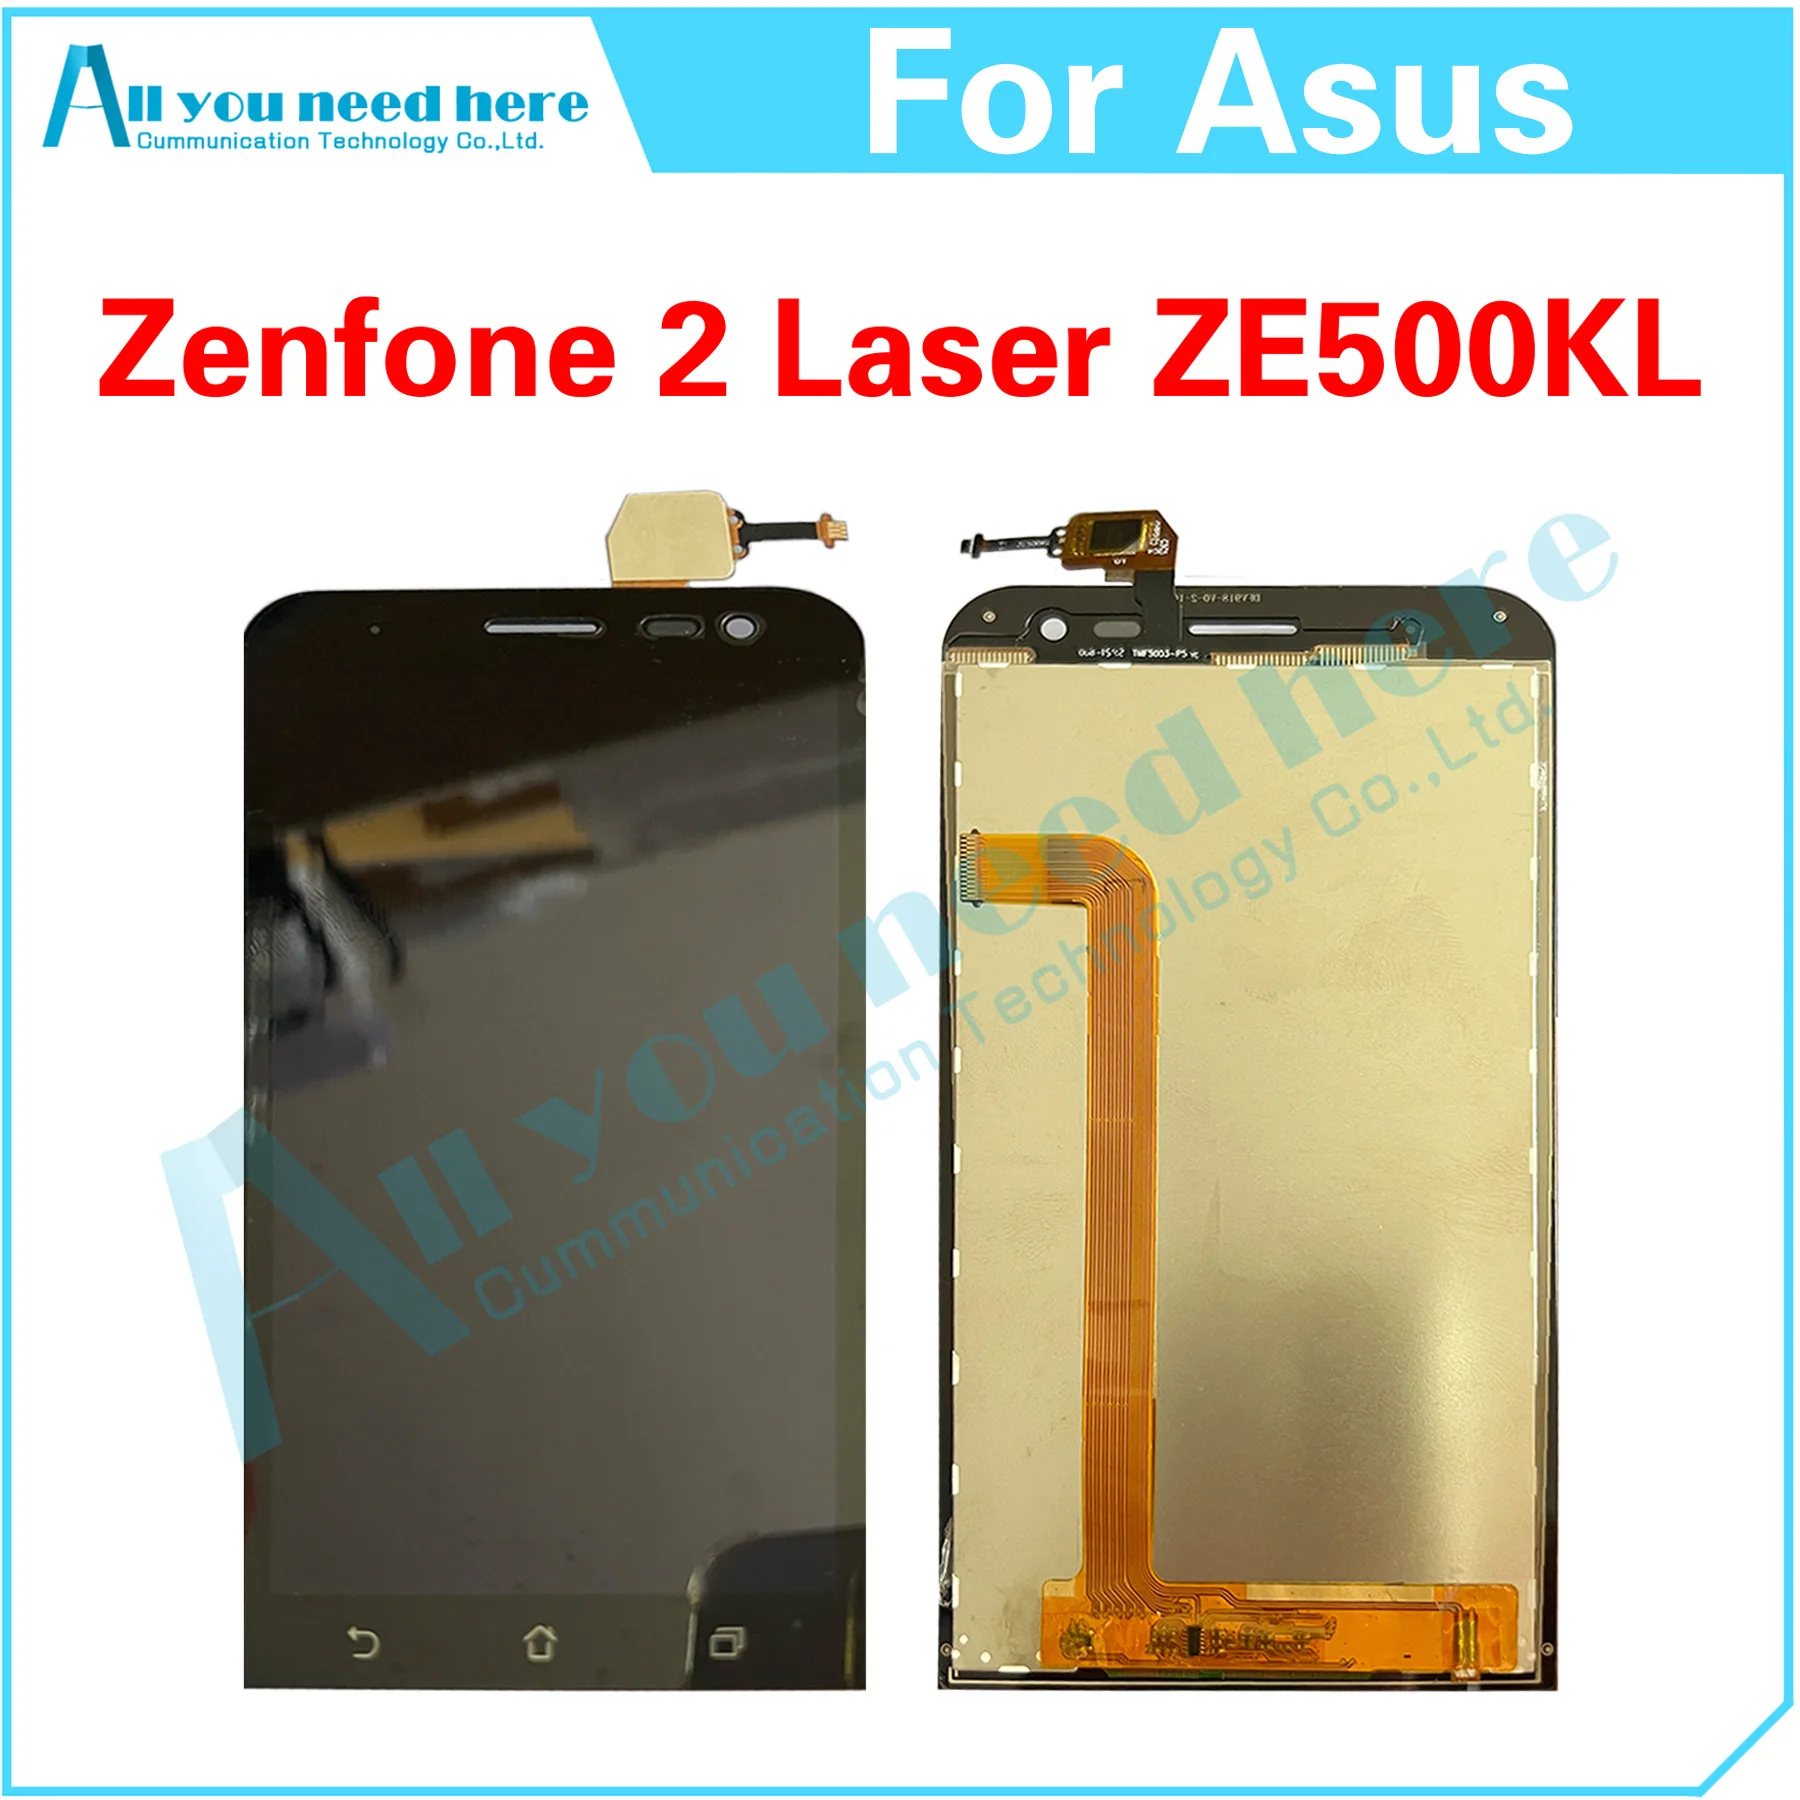 

For Asus Zenfone 2 Laser ZE500KL Z00ED LCD Display Touch Screen Digitizer Assembly Repair Parts Replacement